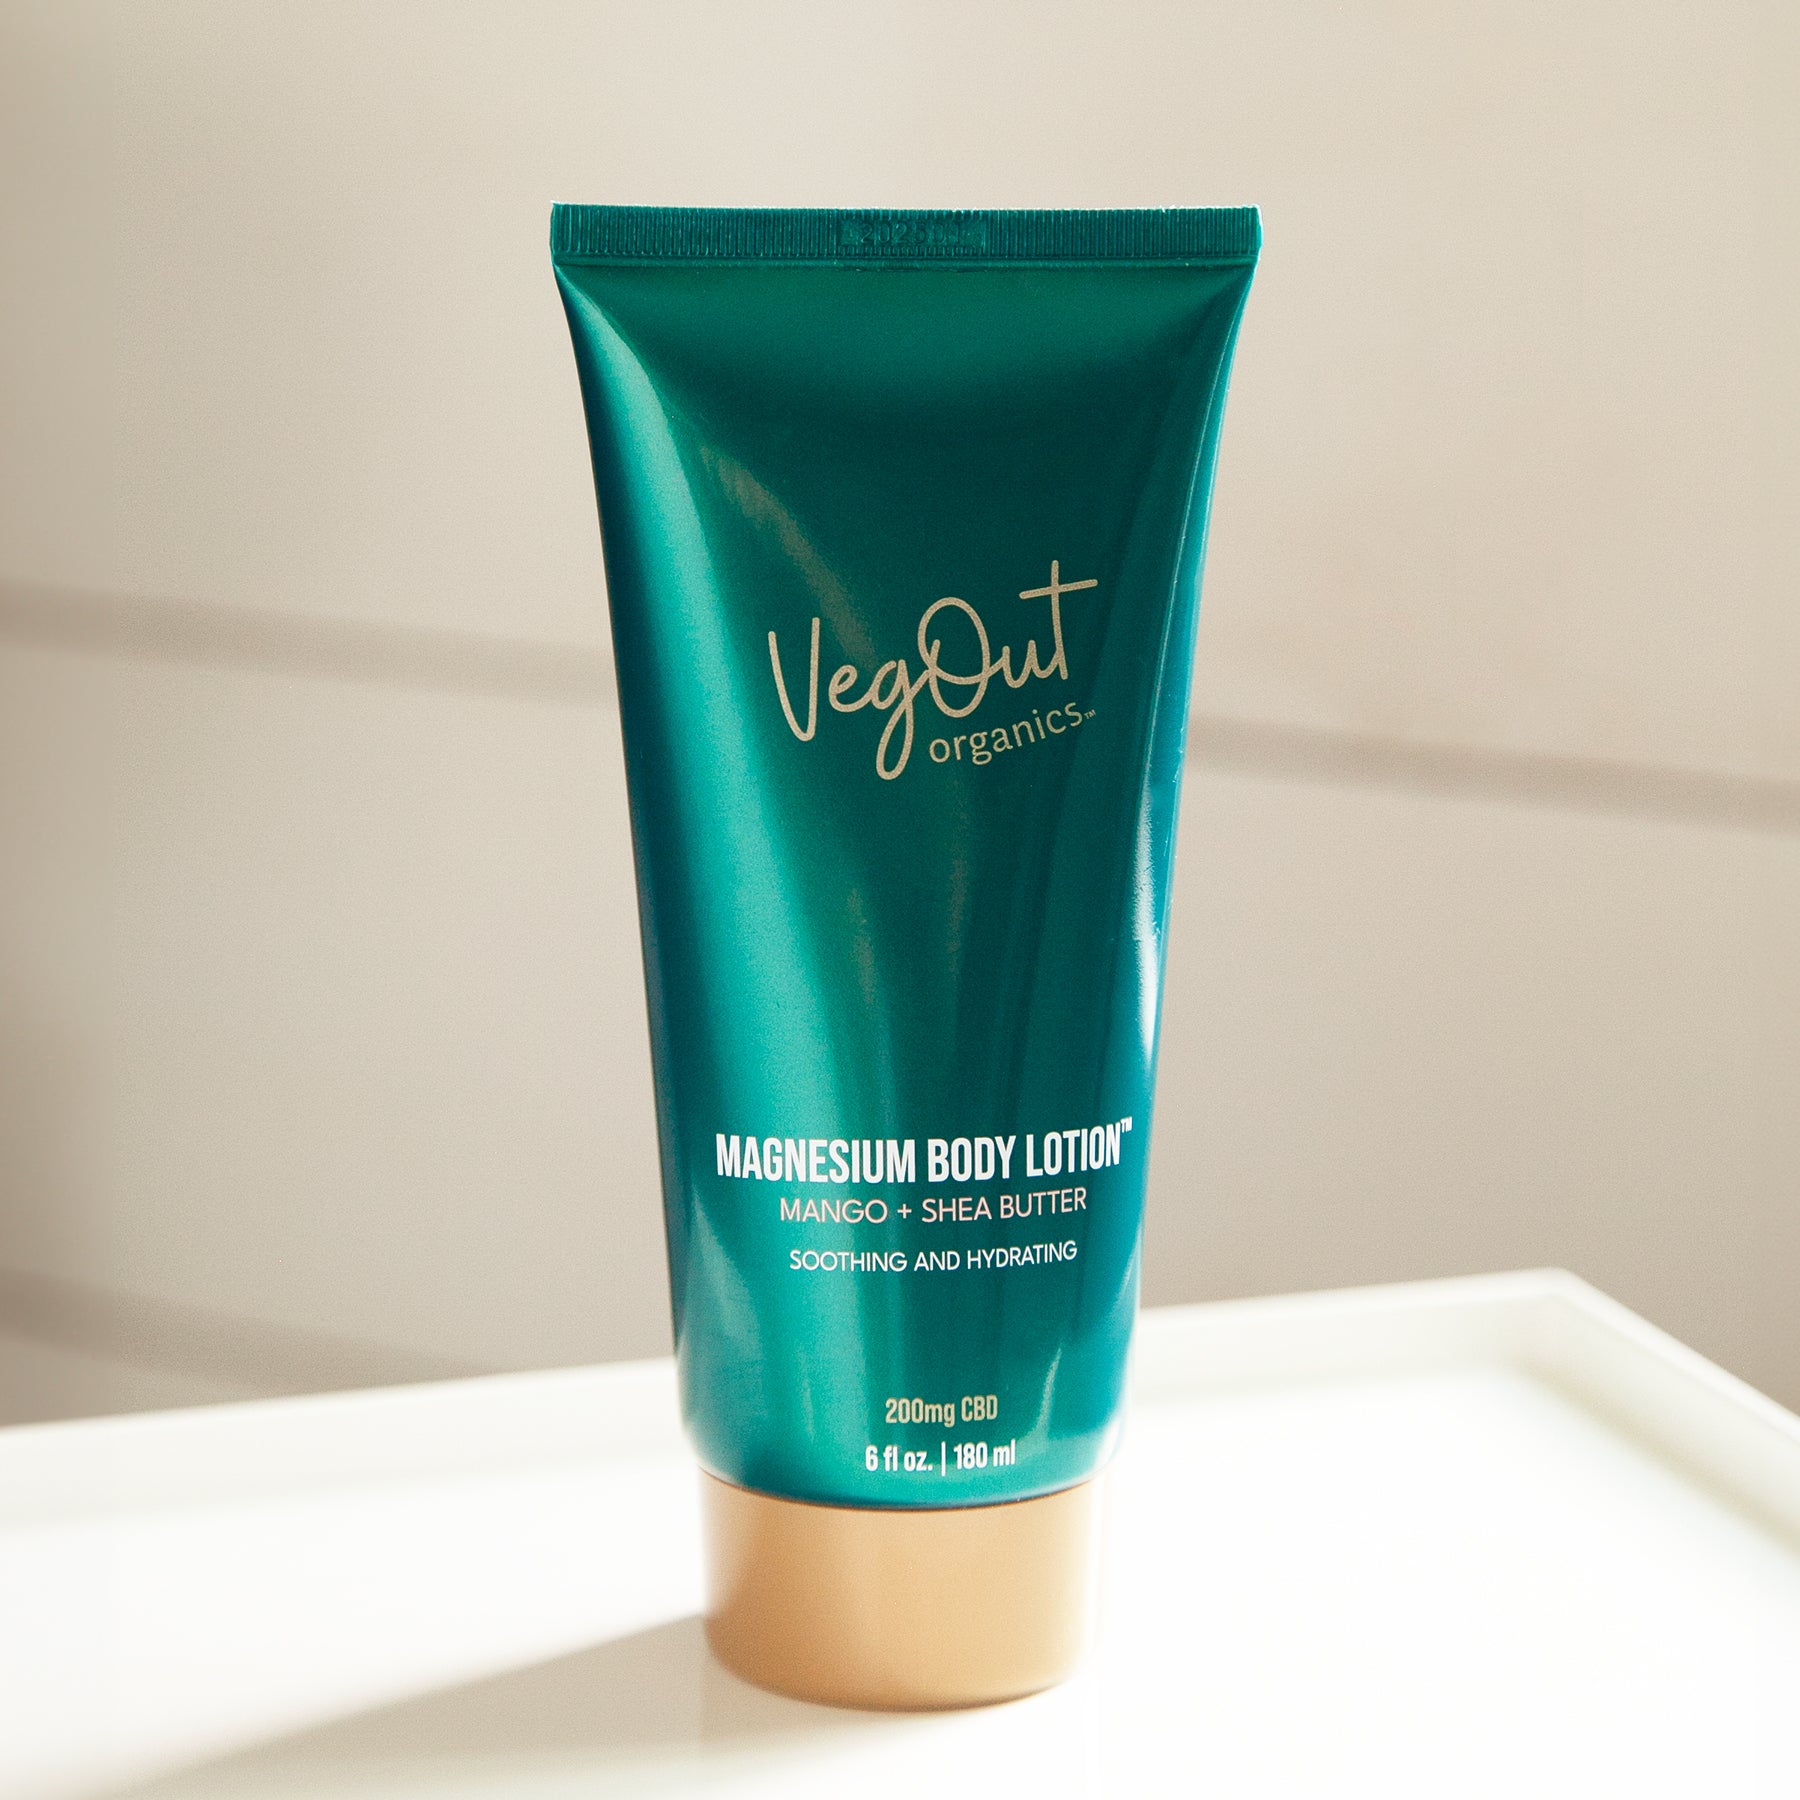 Magnesium Body Lotion for soothing and hydrating skin